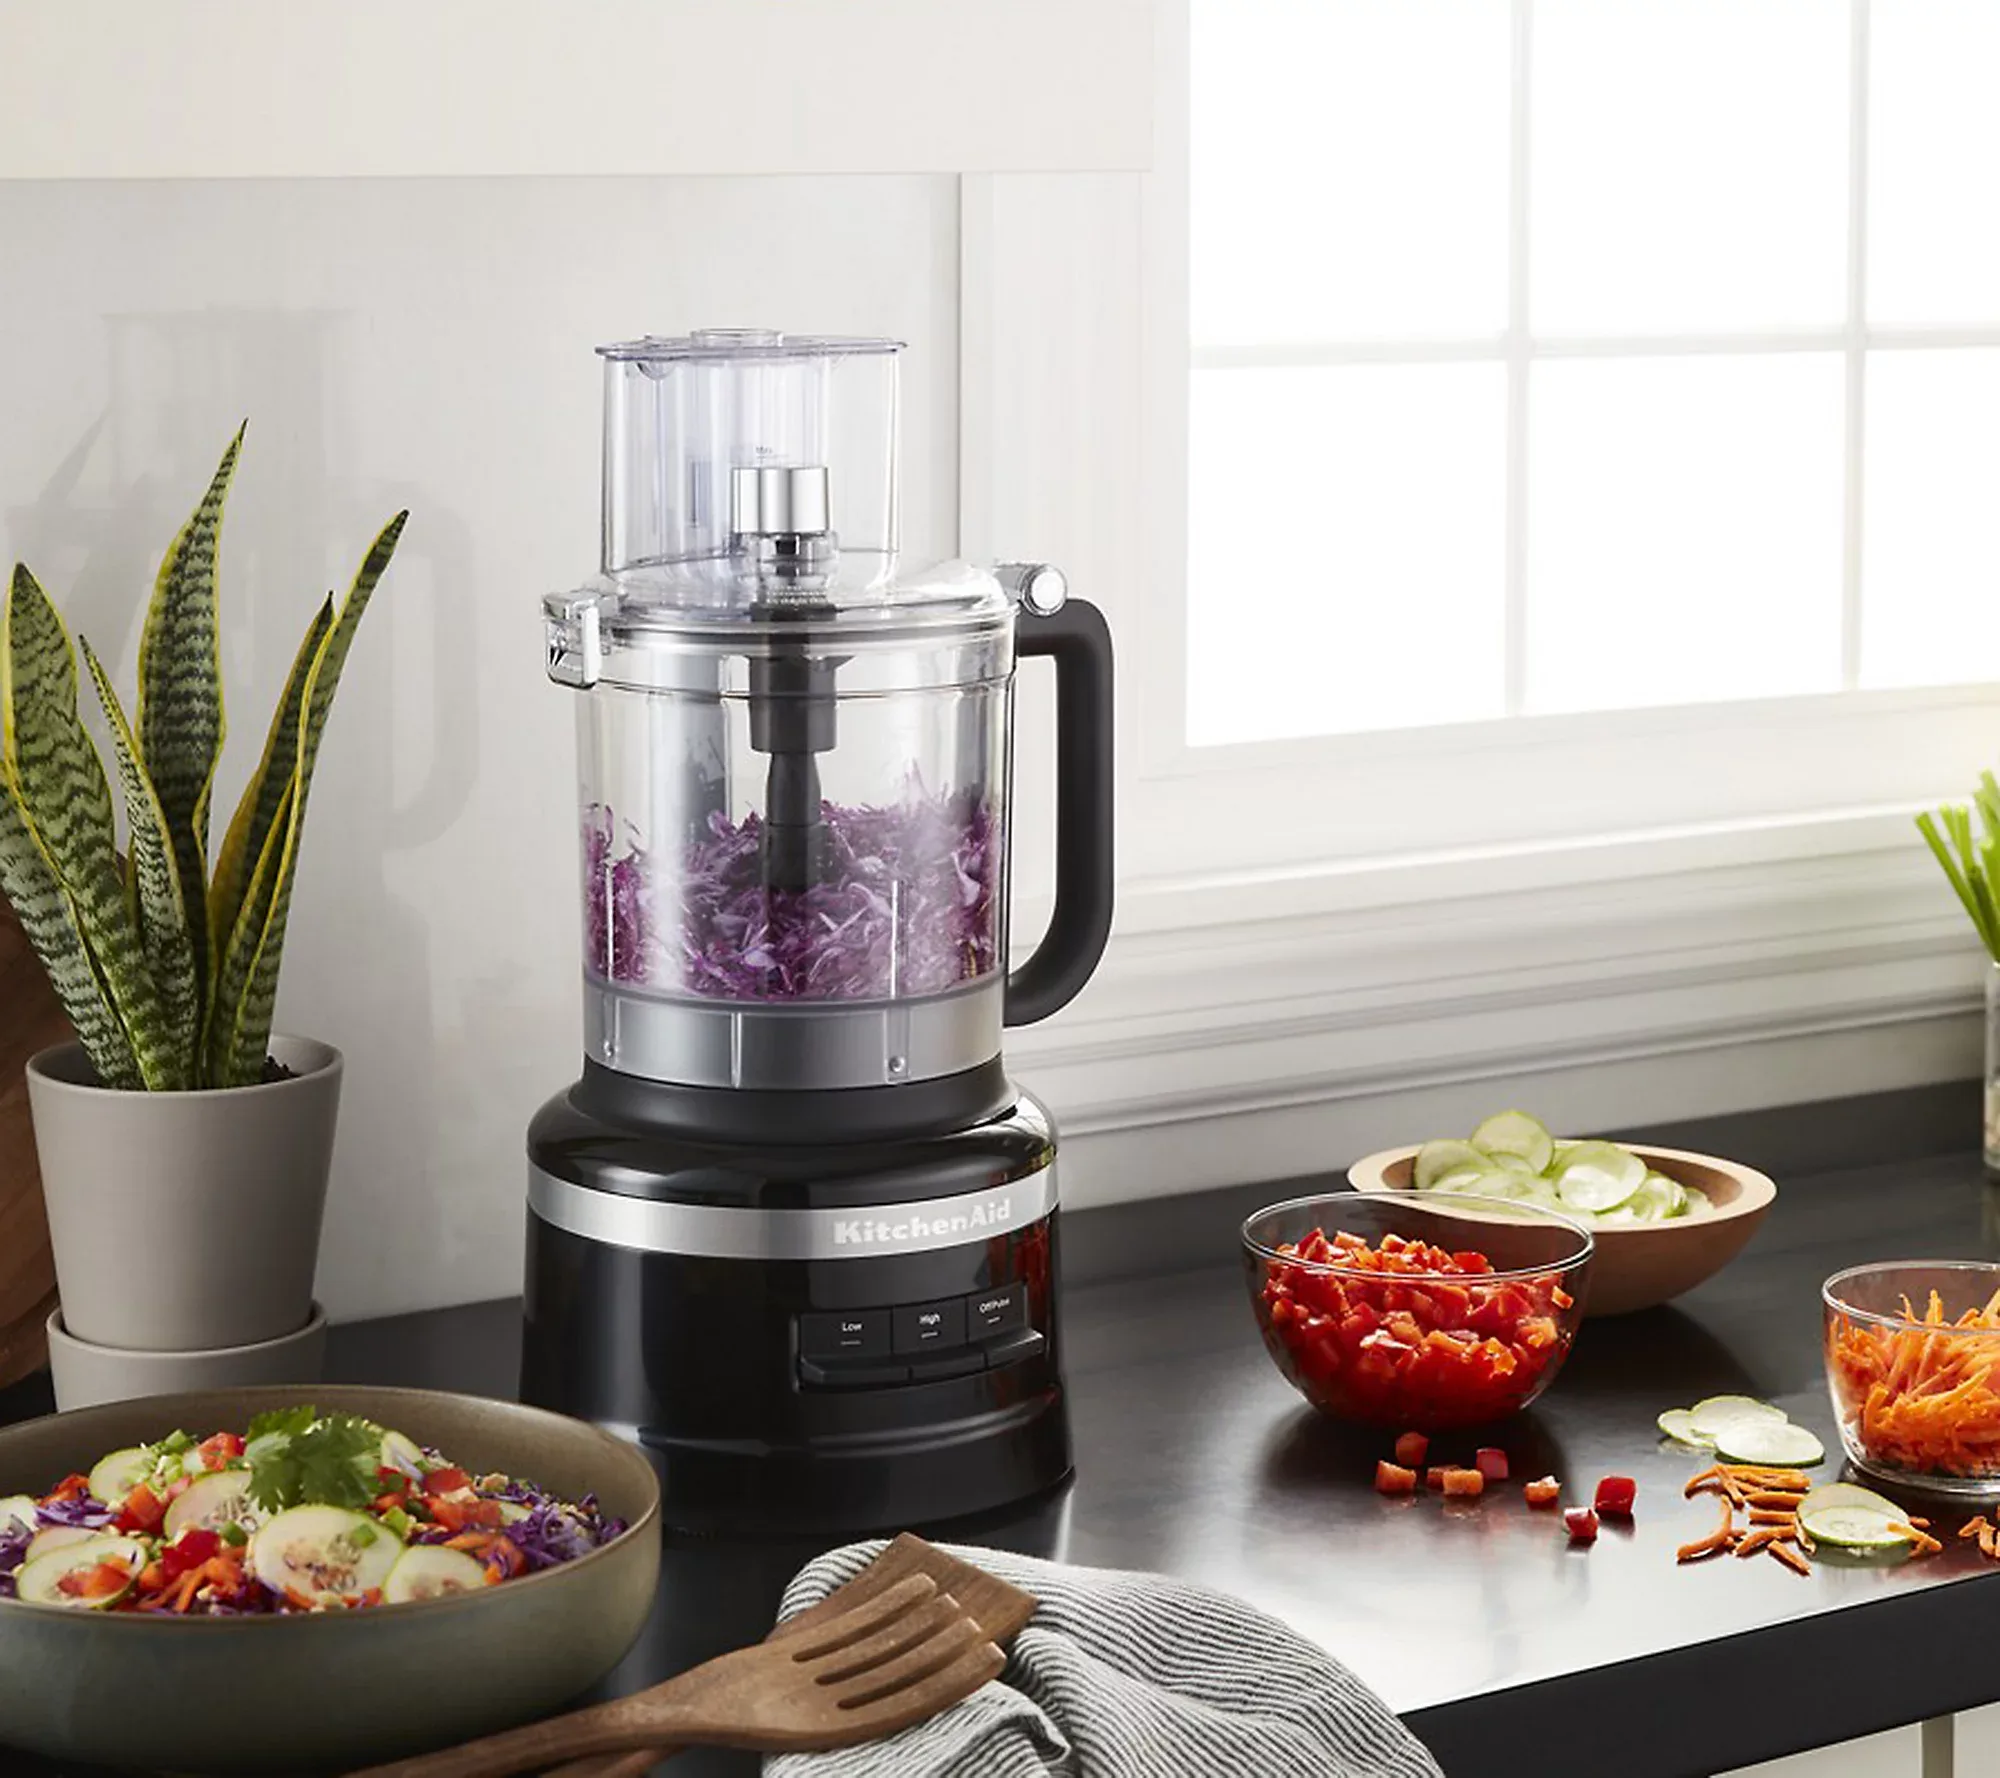 https://cdn.apartmenttherapy.info/image/upload/v1674840026/commerce/qvc-KitchenAid-13-Cup-Food-Processor-Plus-Dicing-Kit-lifestyle.webp